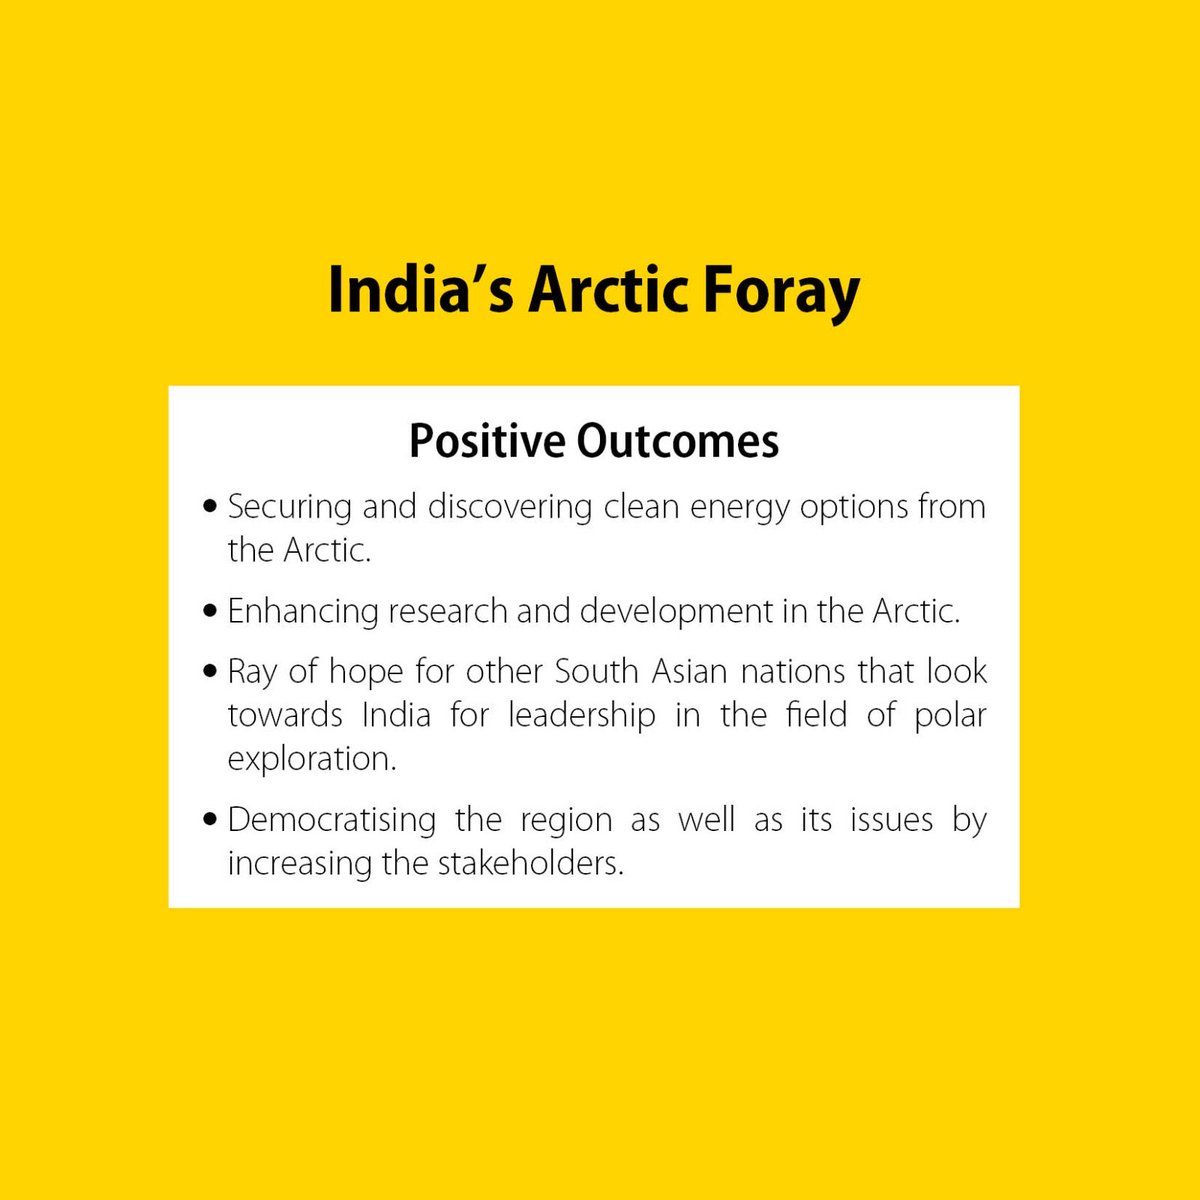 Read more about India's Arctic Foray on our website (Saghaa.org). saghaa7.blogspot.com/2023/02/indias…
#arctic #cleanenergy #arcticpolicy #globalwarming #antarctic #climatechange #governmentaction #climatechange